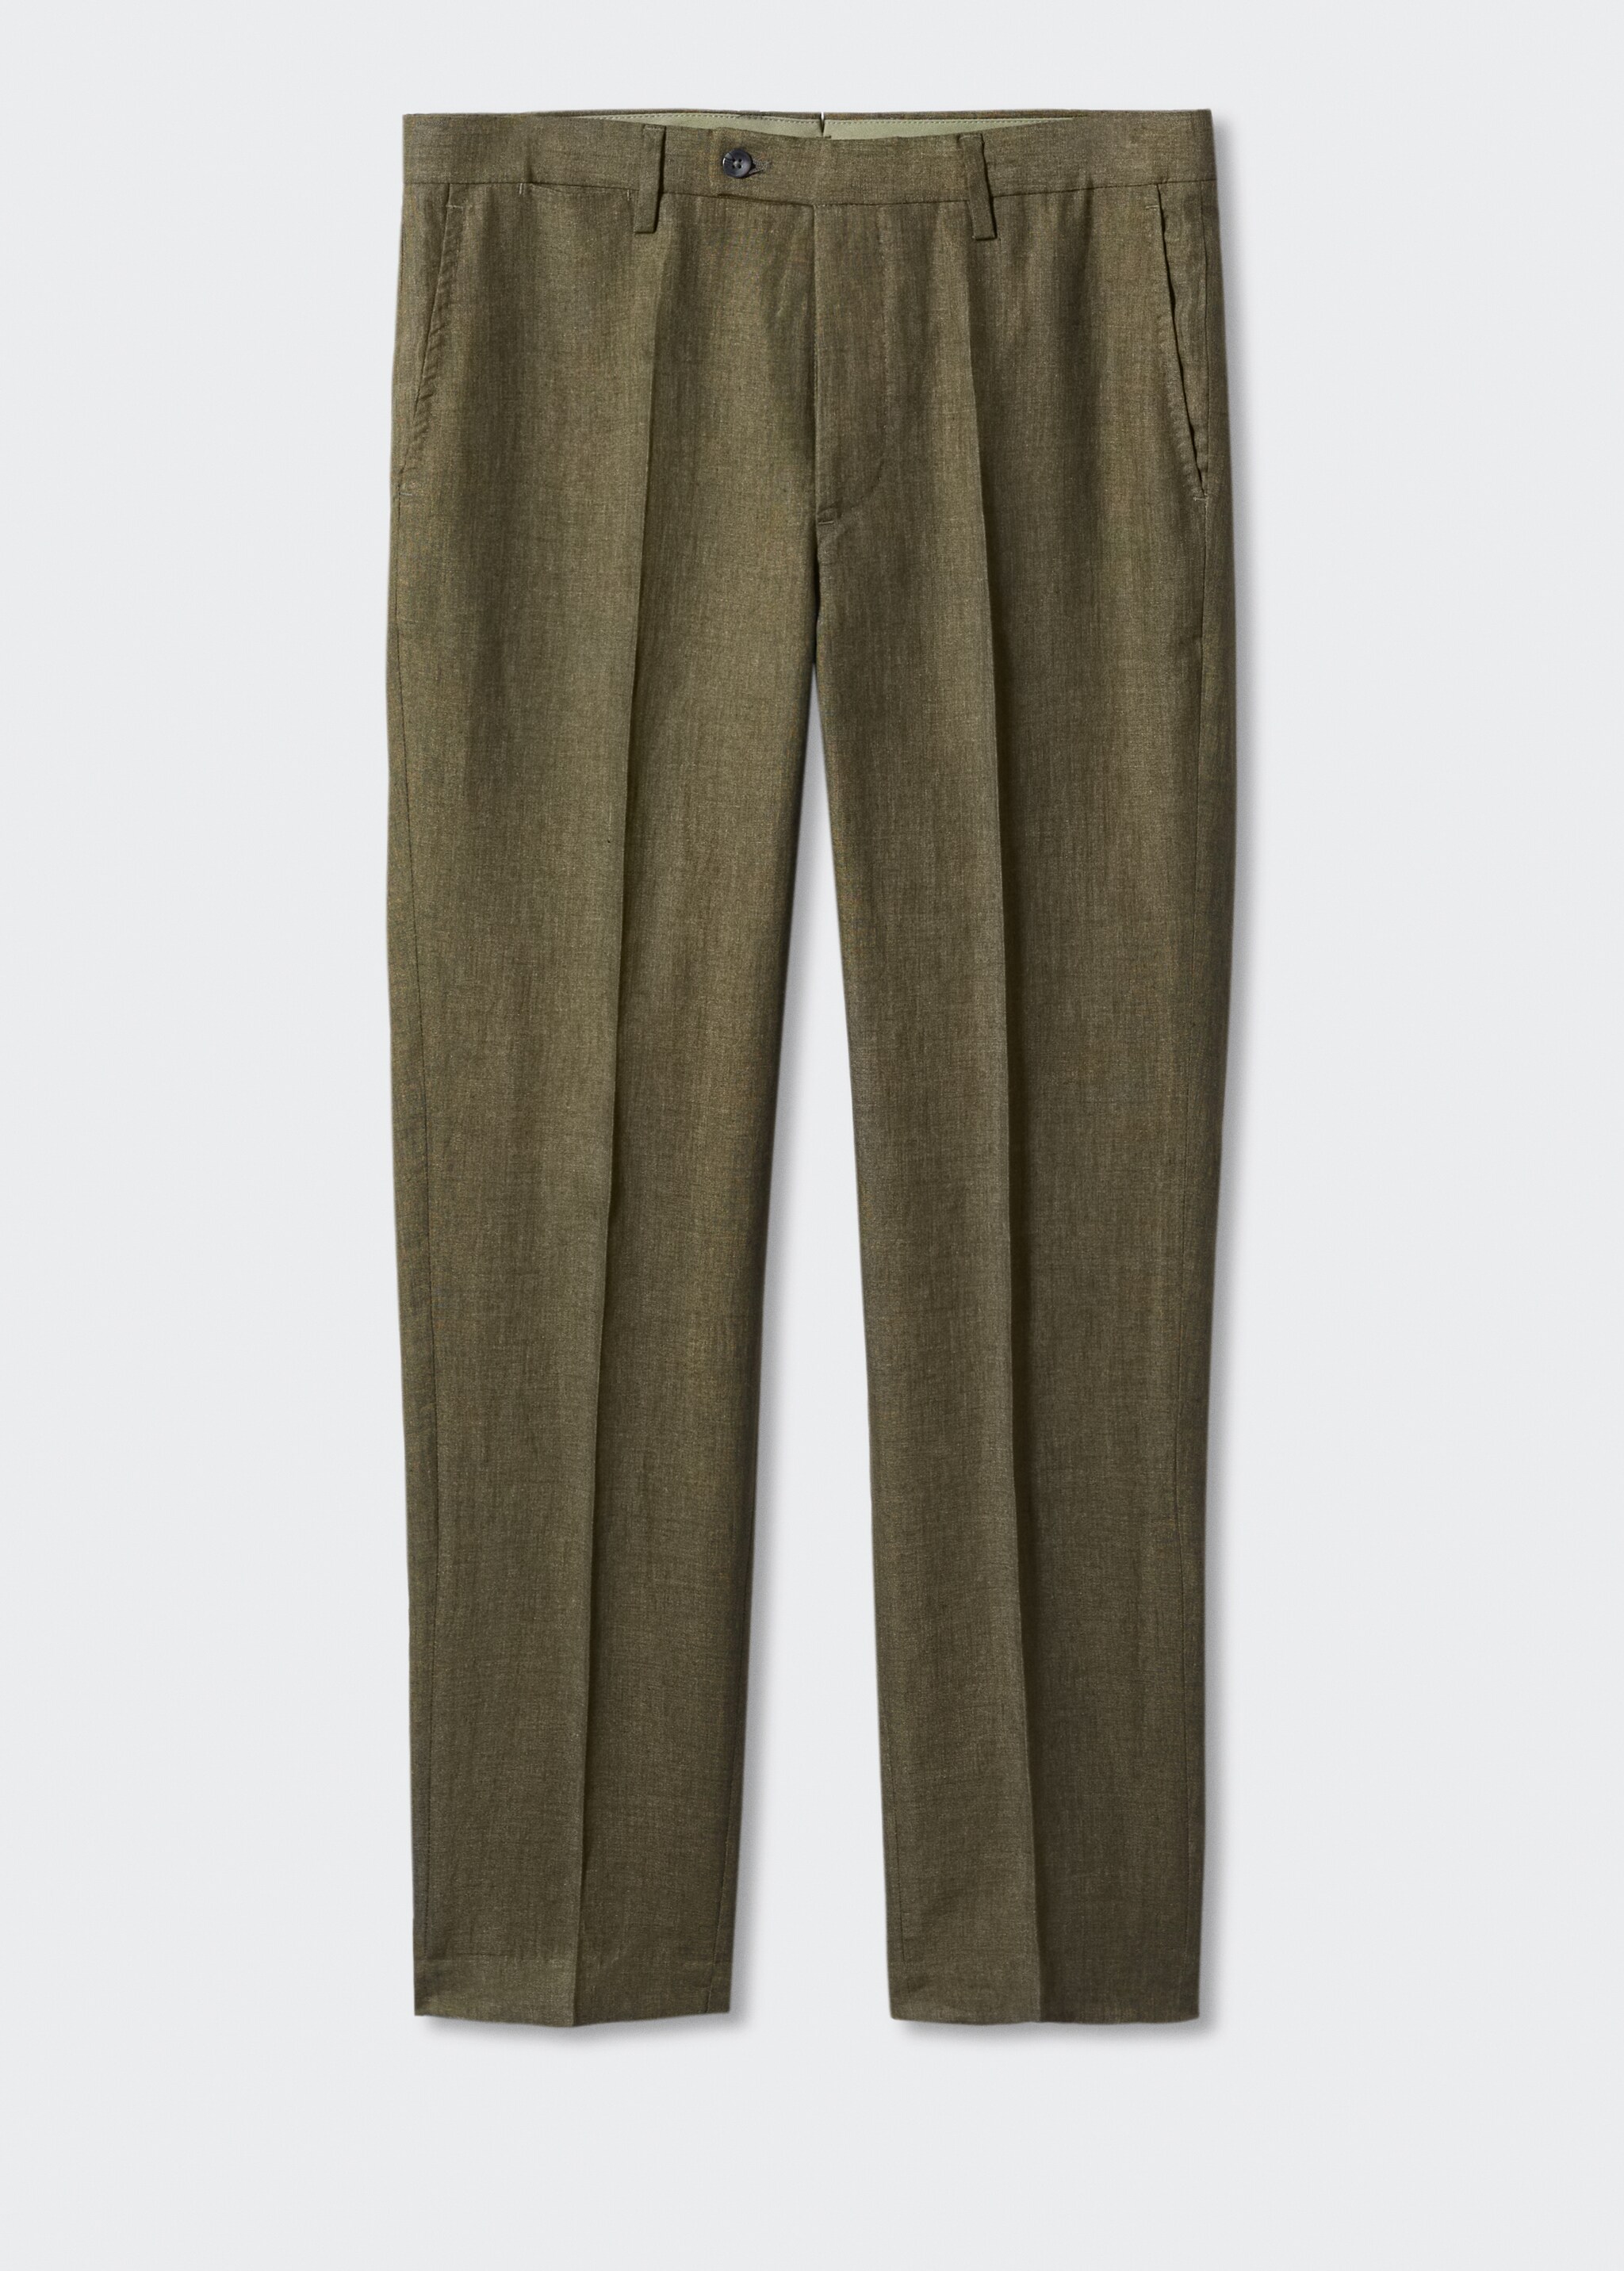 100% linen suit trousers - Article without model